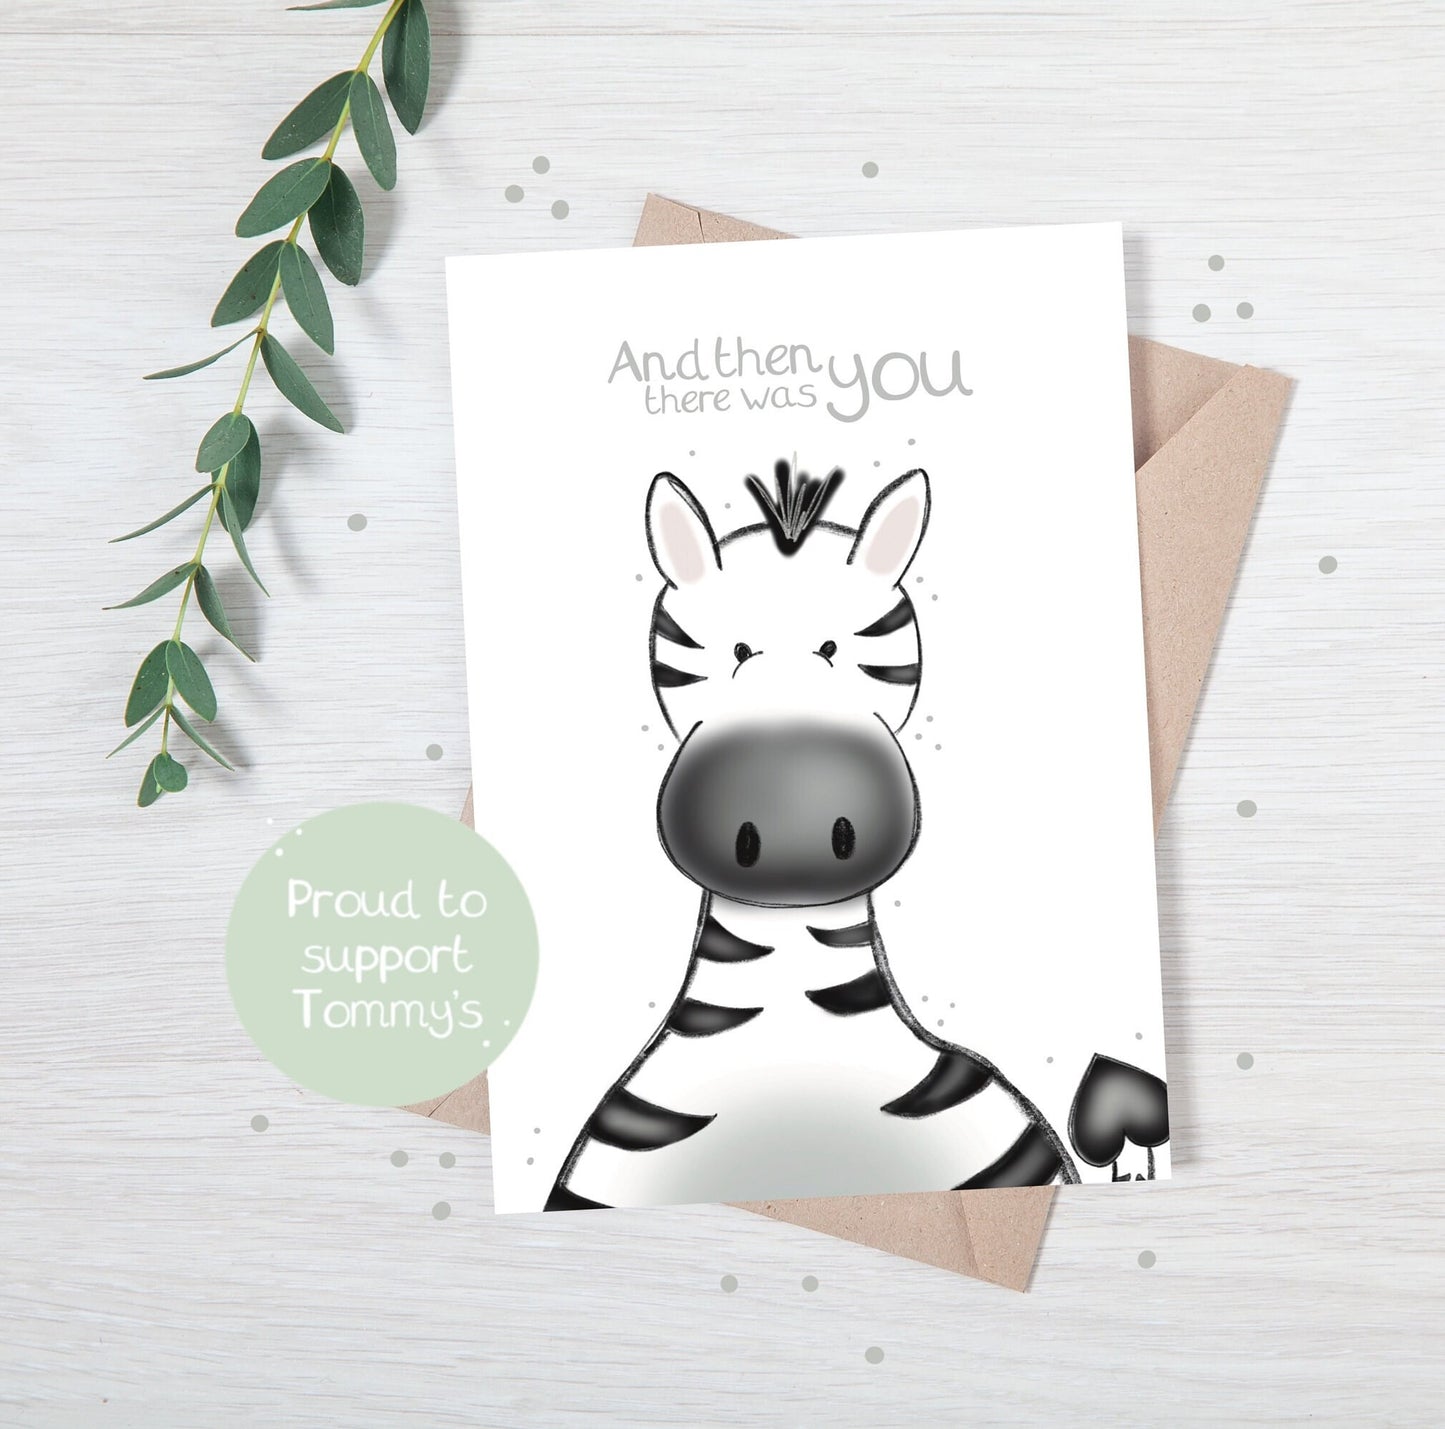 luxury new baby christening greetings card with a safari theme baby zebra popping up from the bottom with the title &quote "and then there was you" on a white background, with a kraft envelope